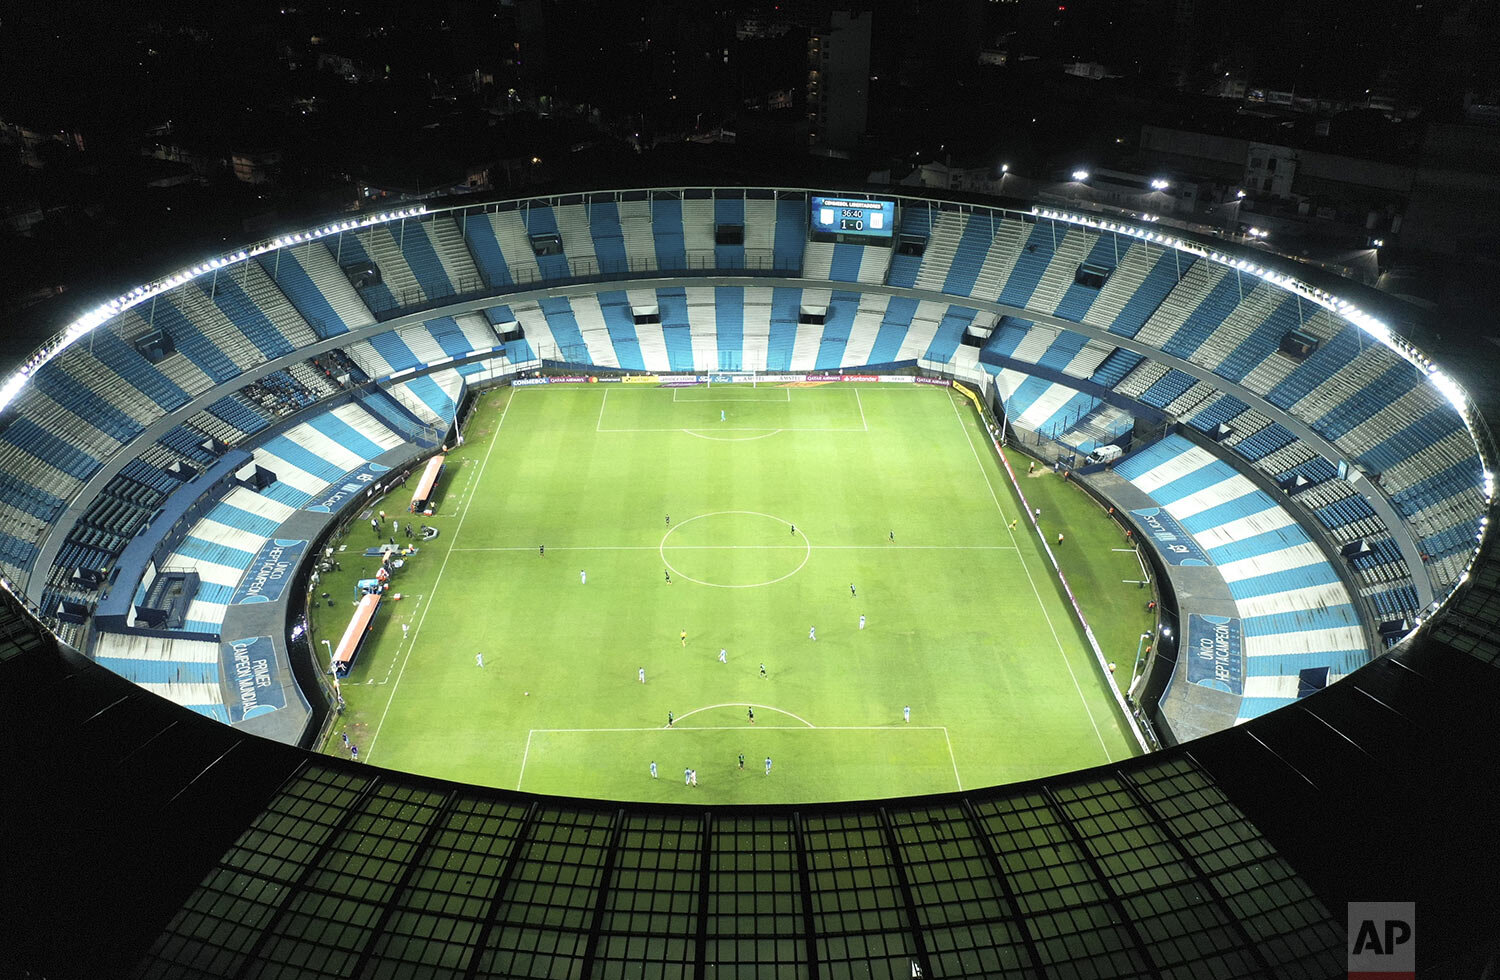  Peru's Alianza Lima and Argentina's Racing Club play a Copa Libertadores soccer match in an empty Presidente Peron stadium in Buenos Aires, Argentina, March 12, 2020, closed to fans to help contain the spread of the new coronavirus. (AP Photo/Gustav